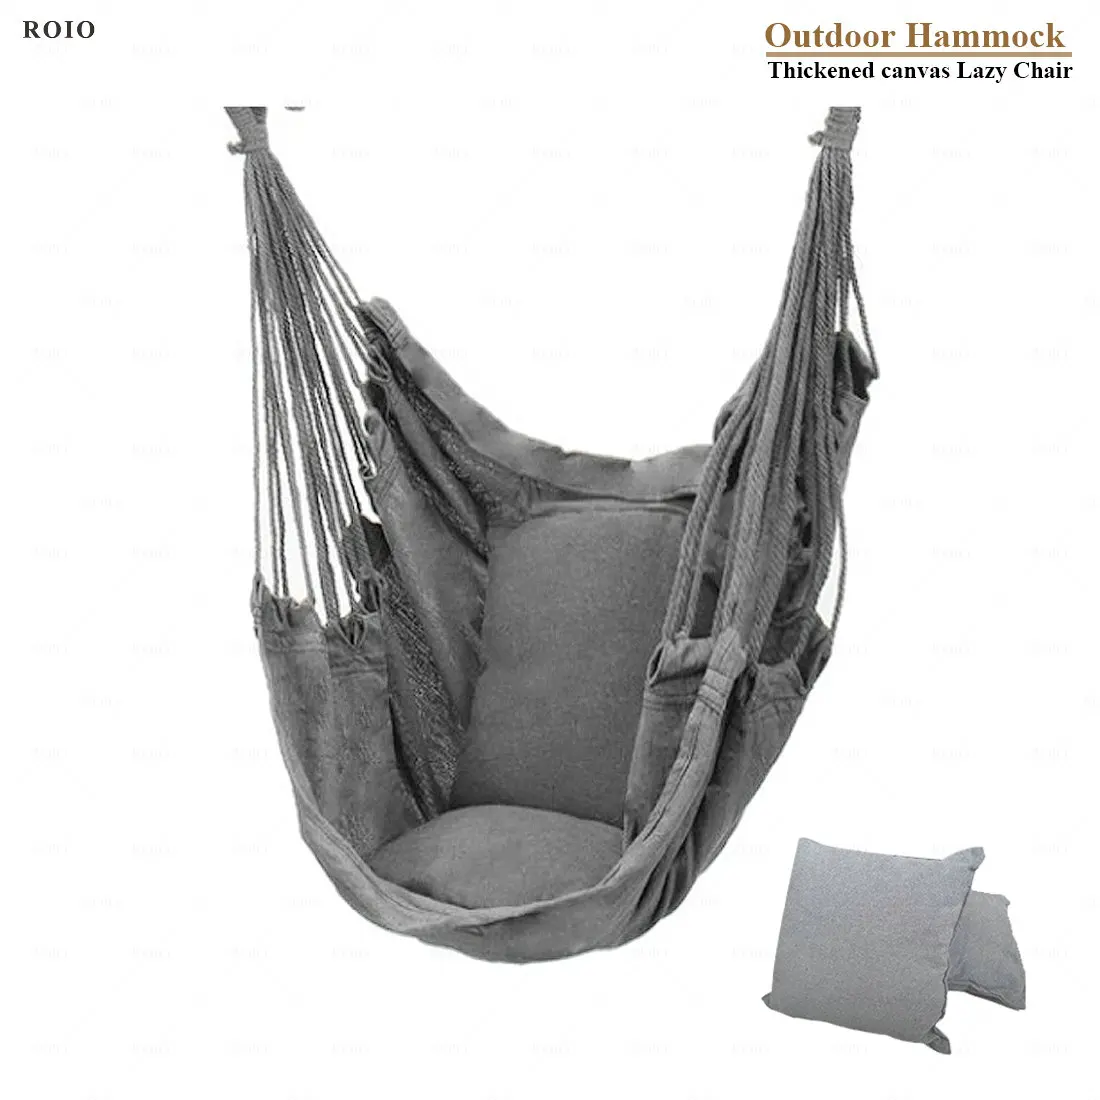 Outdoor Hammock Thicken Chair Hanging Portable Relaxation Canvas Swing Steady Seat Travel Camping Lazy Chair with Pillow